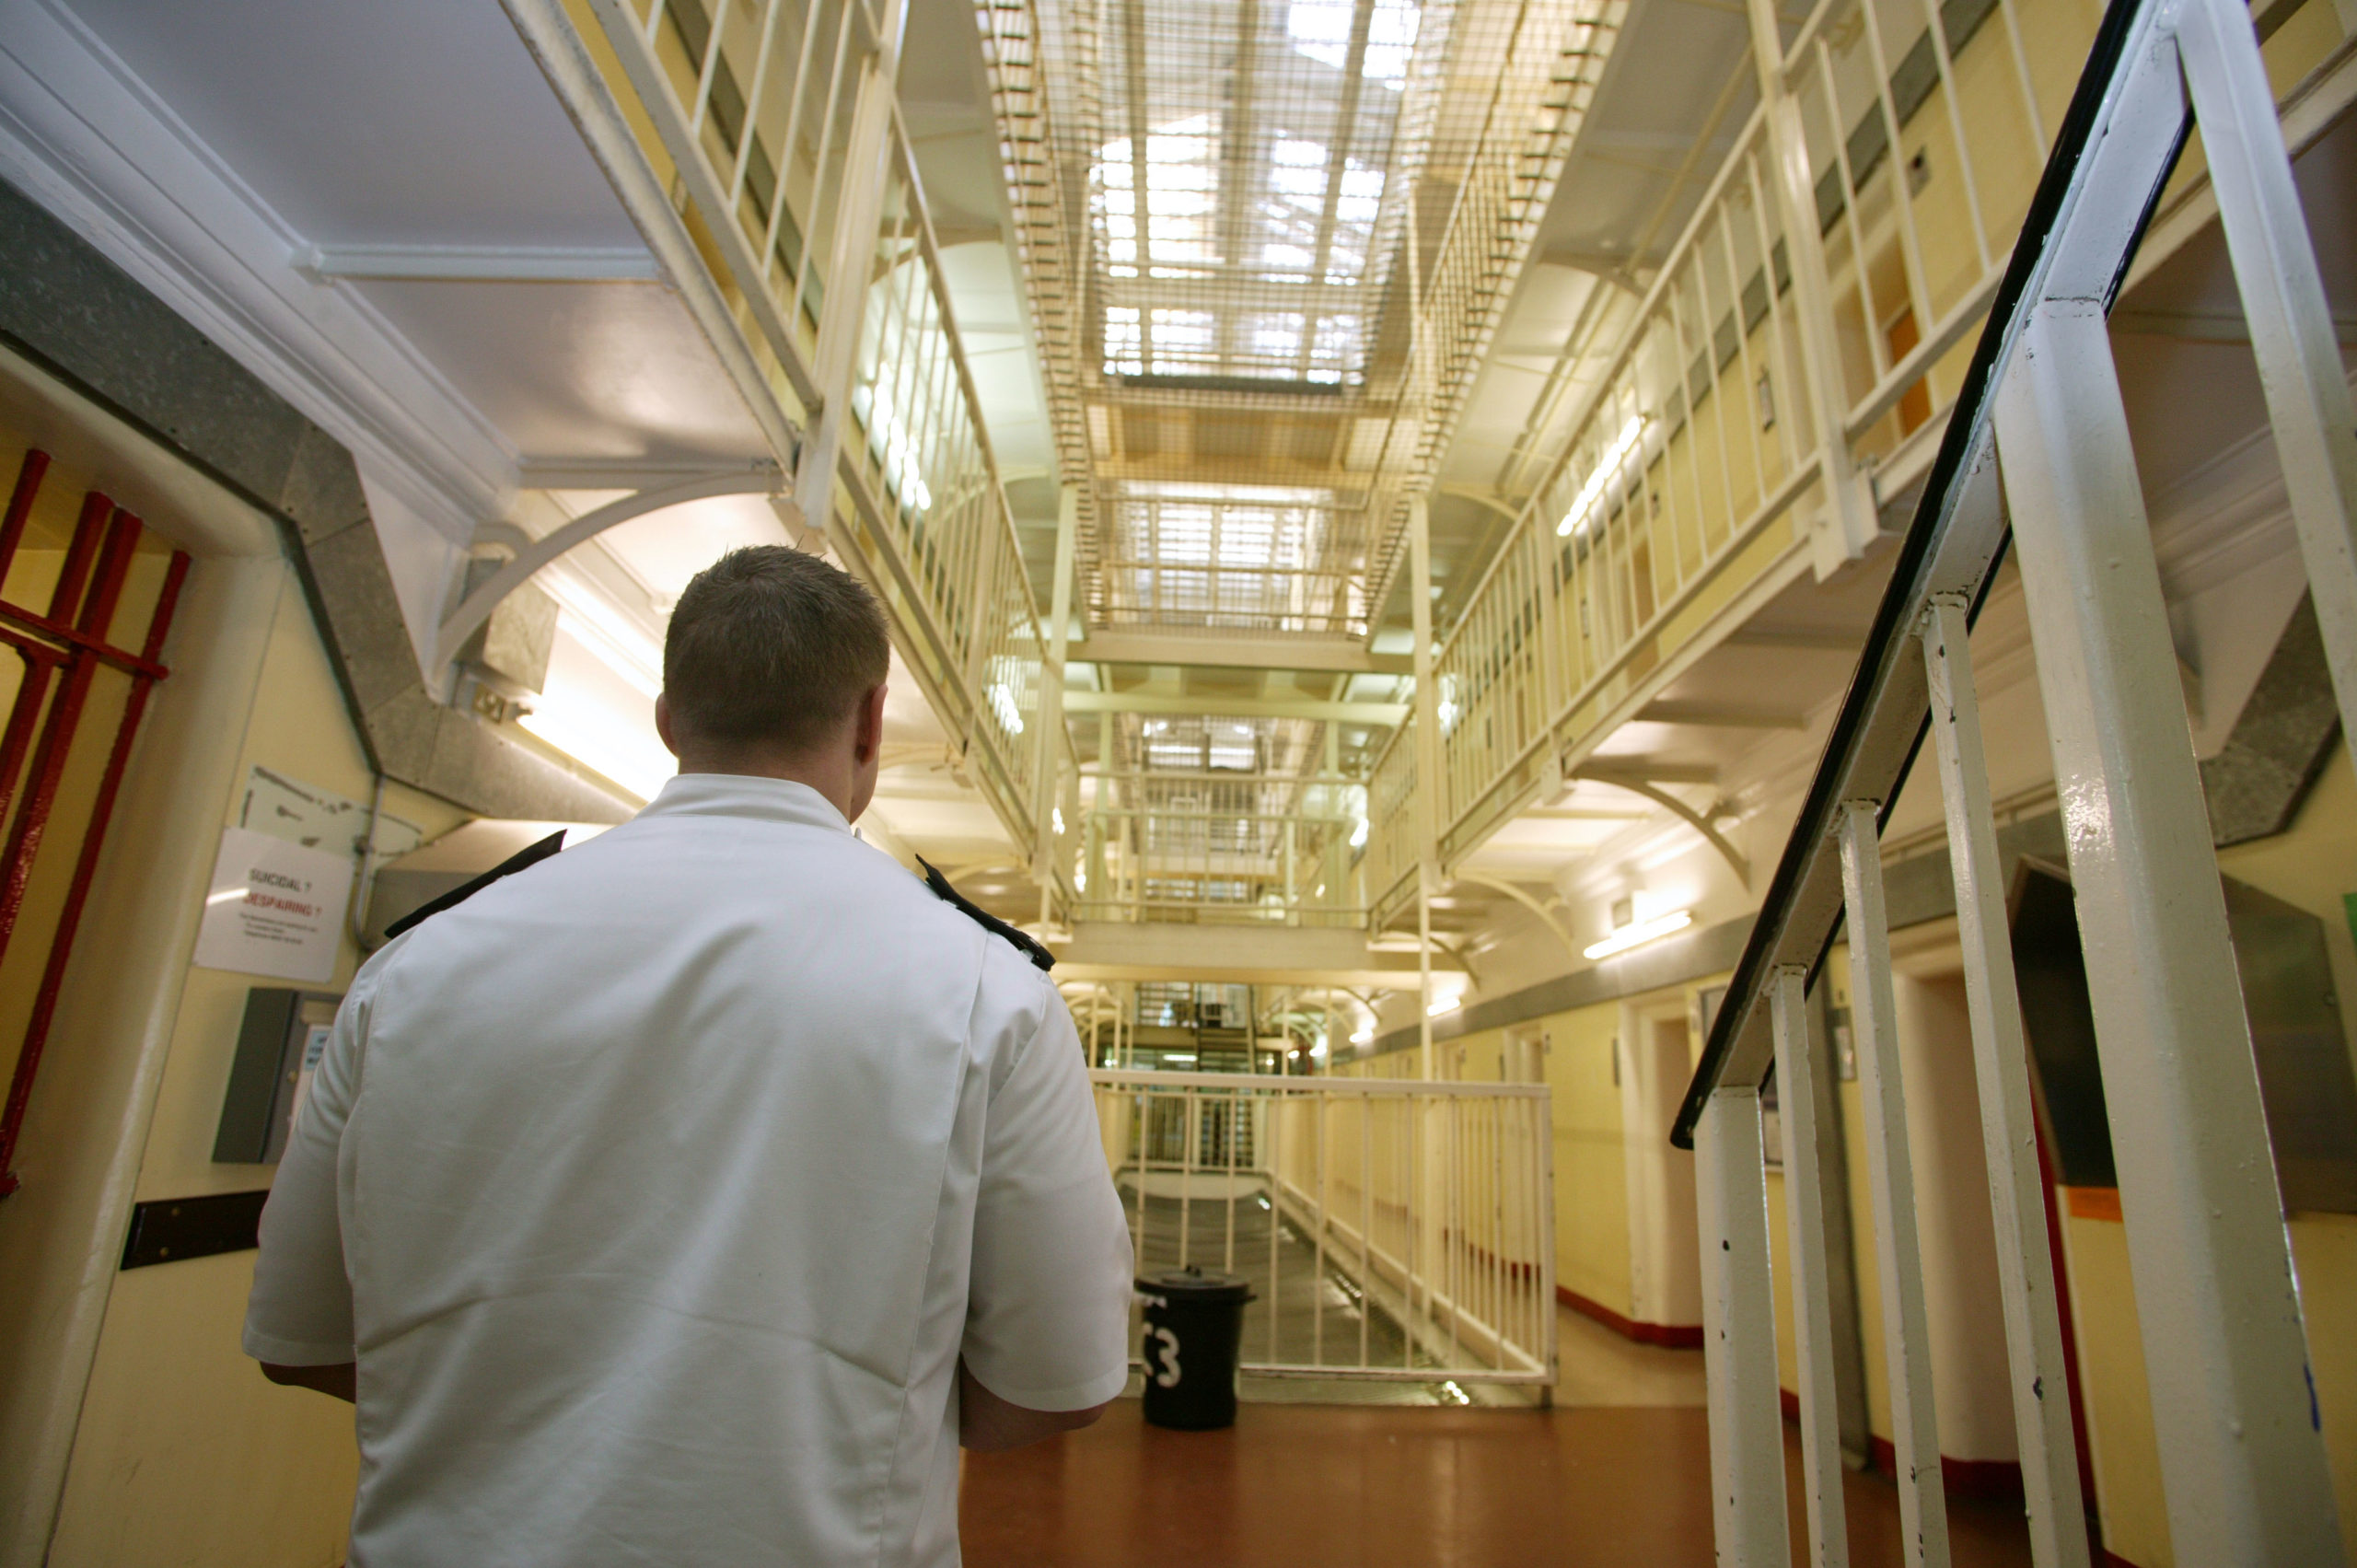 Let’s use this opportunity to reform our prisons